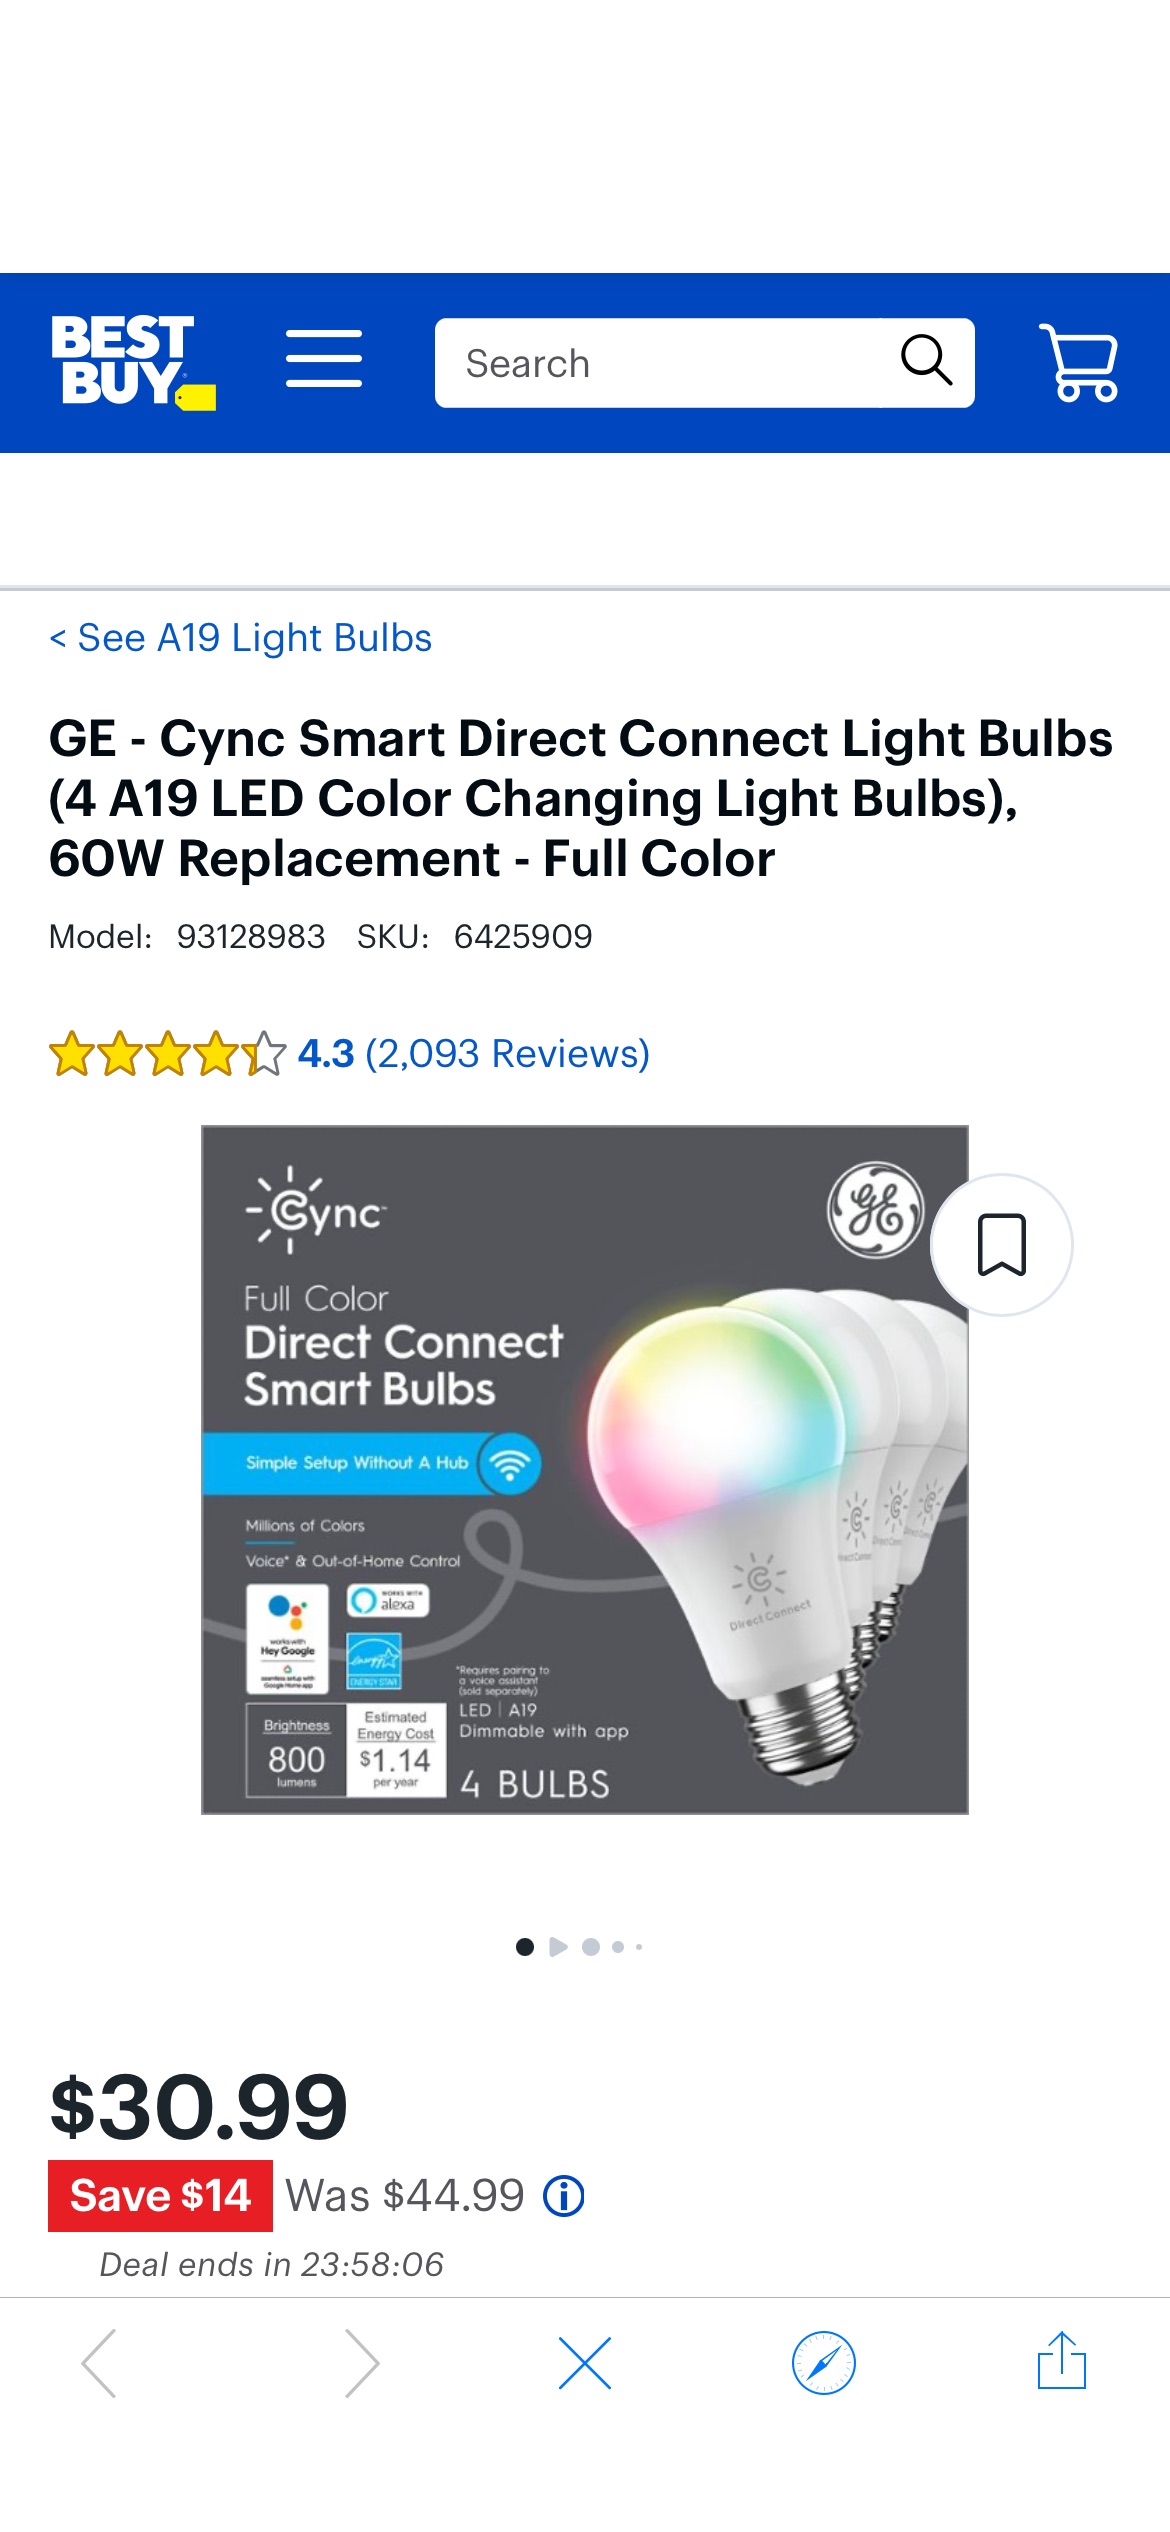 GE Cync Smart Direct Connect Light Bulbs (4 A19 LED Color Changing Light Bulbs), 60W Replacement Full Color 93128983 - Best Buy